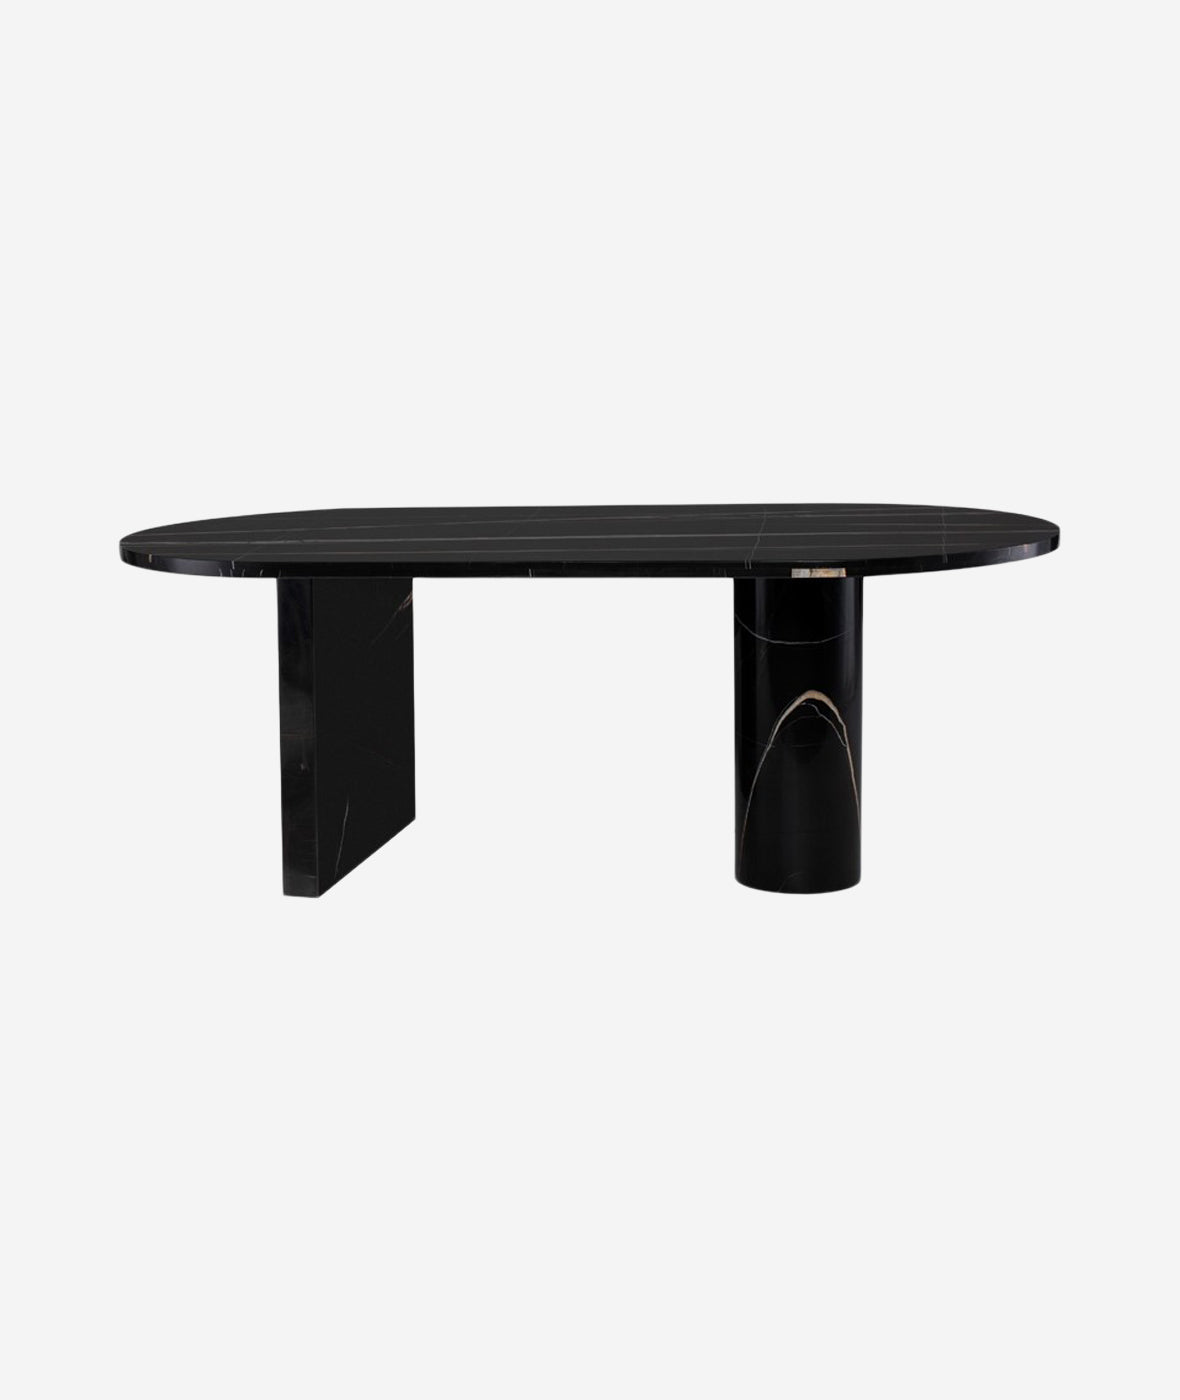 Stories Oval Dining Table - More Options